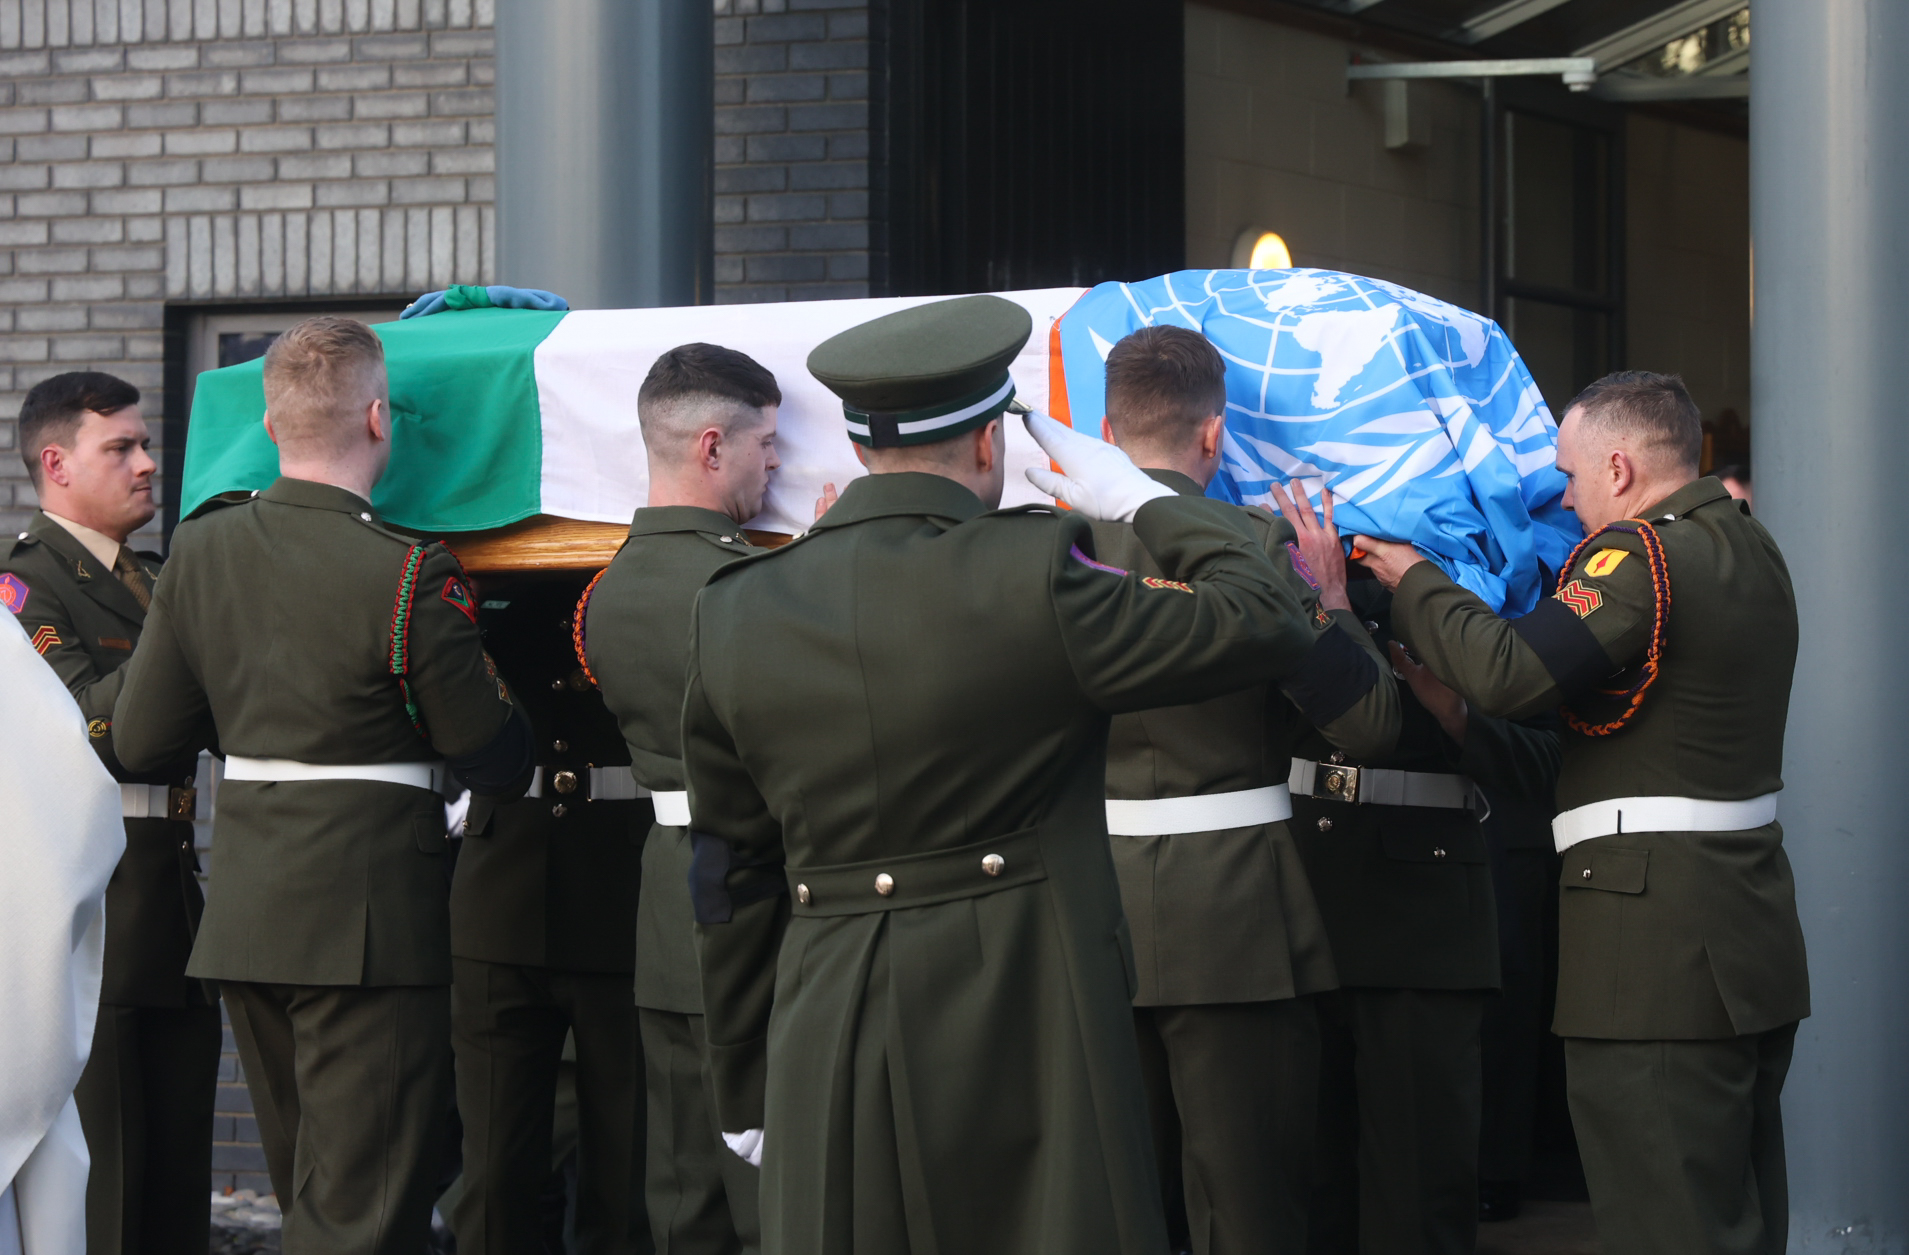 A Defence Forces guard accompanies the coffin of Pte Seán Rooney as it is carried from the Holy Family Church in Dundalk, 22-12-2022. Image: Sam Boal / RollingNews